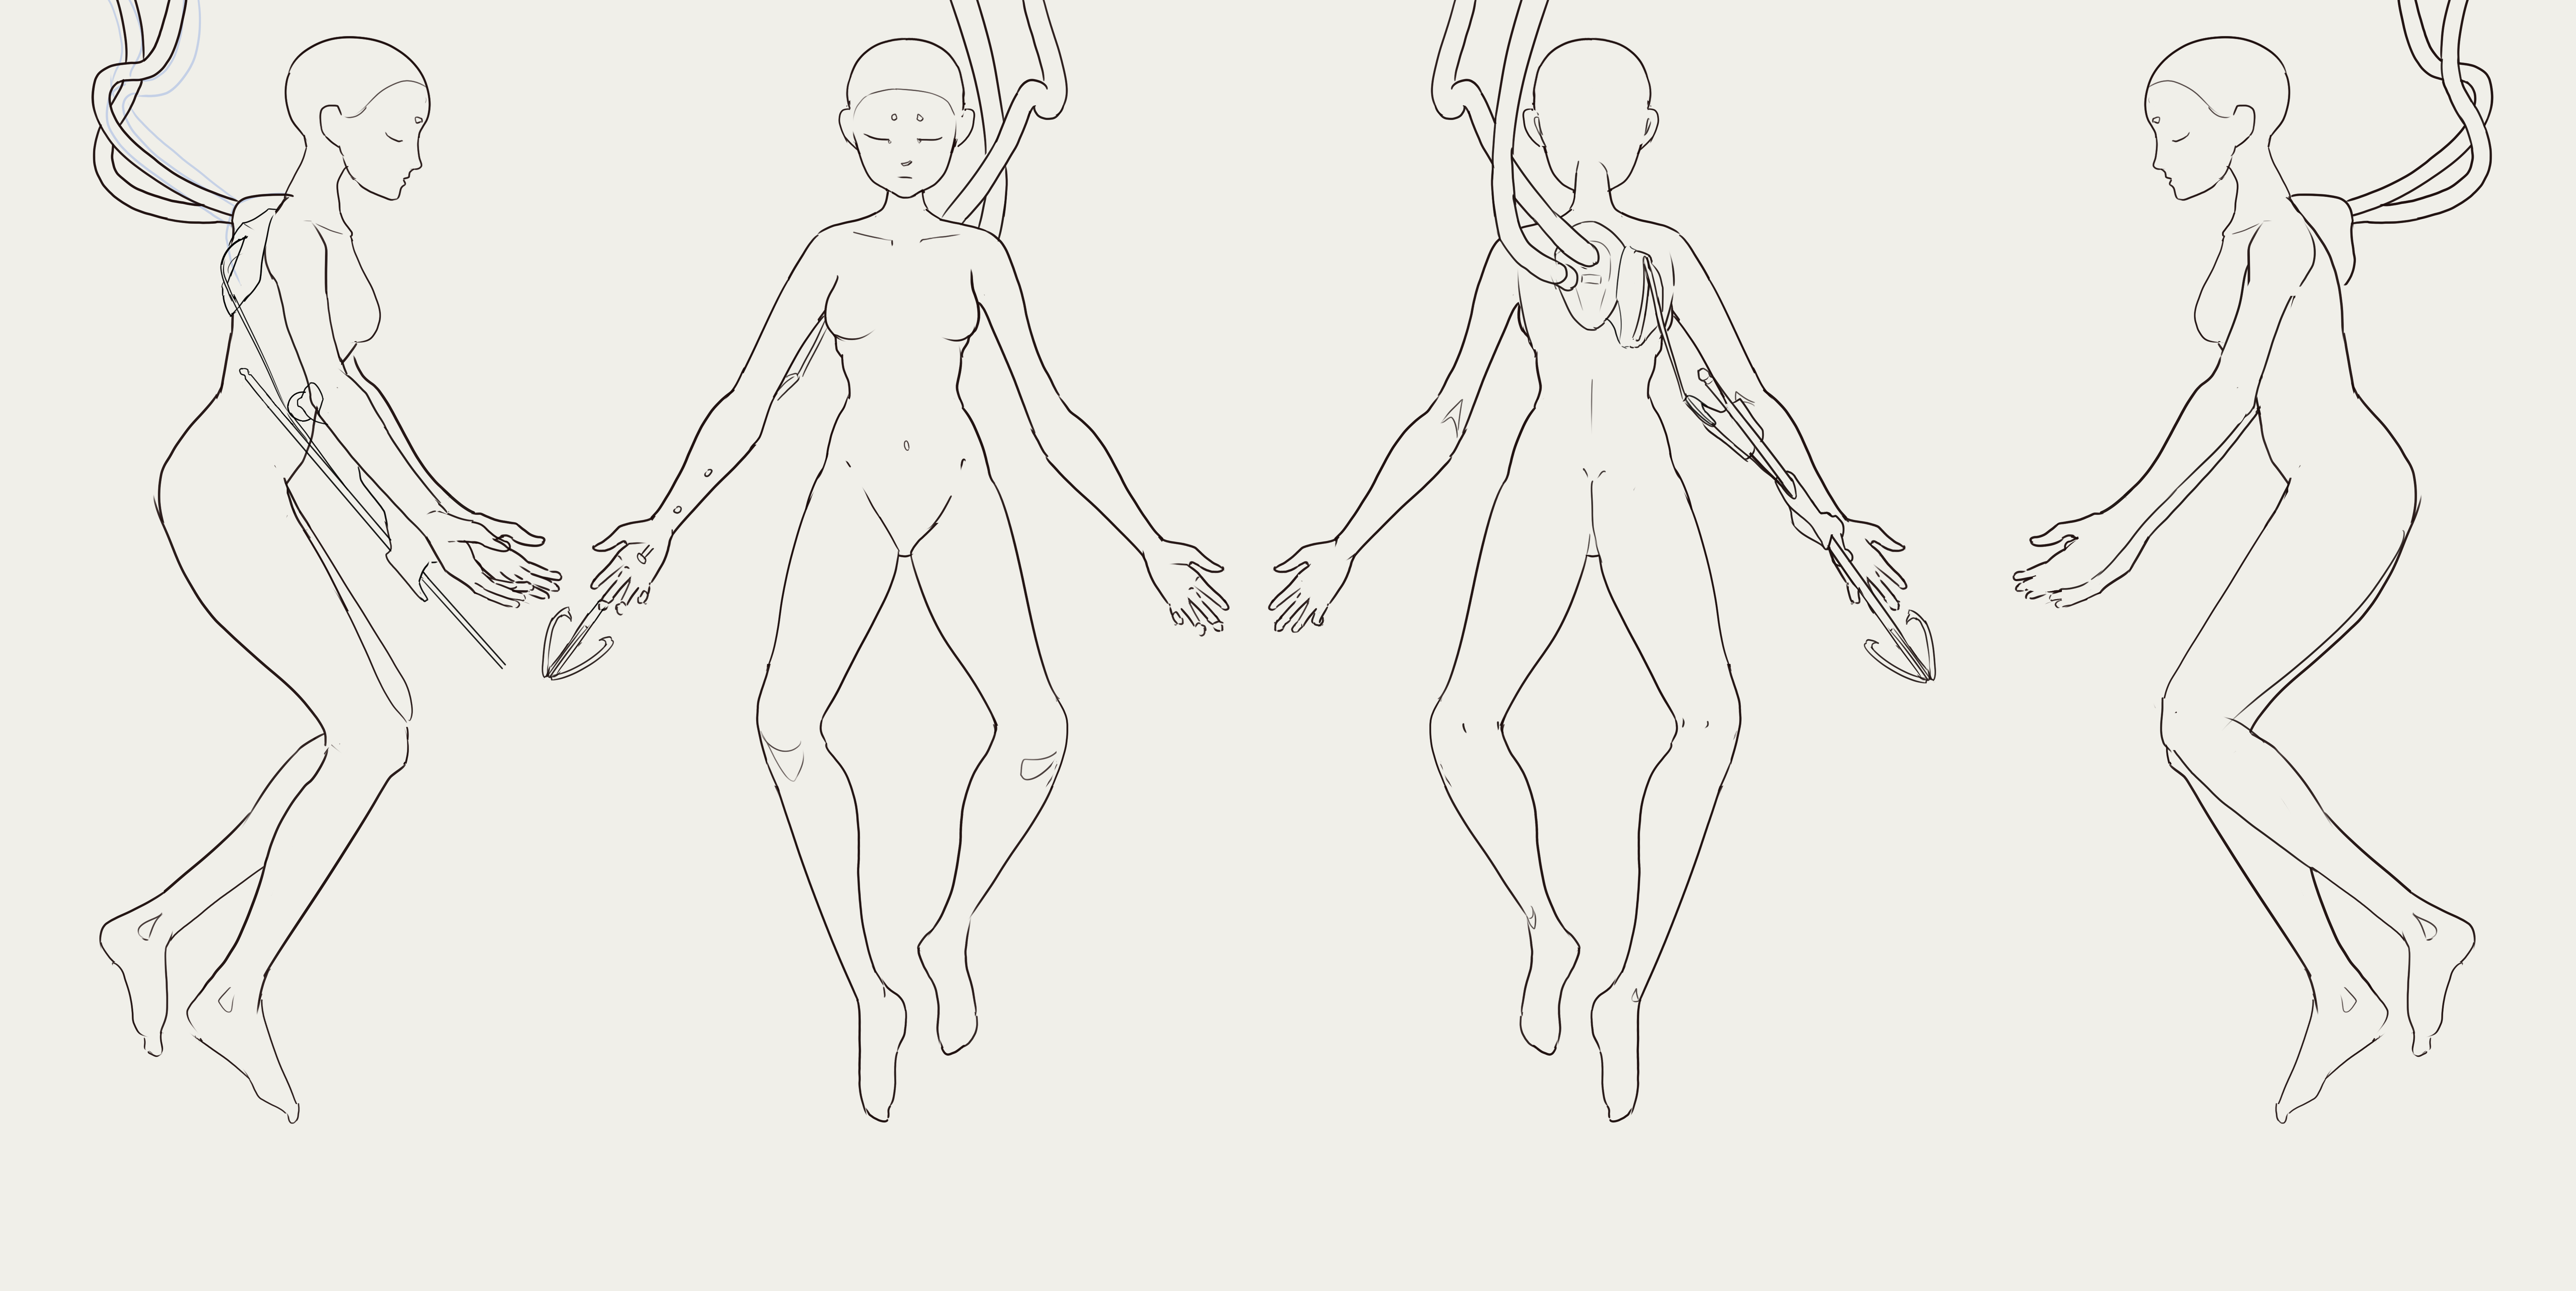 Four views of a character with doll-like proportions, in a pose suggesting floating in fluid, with cables attached to the nape of her neck.